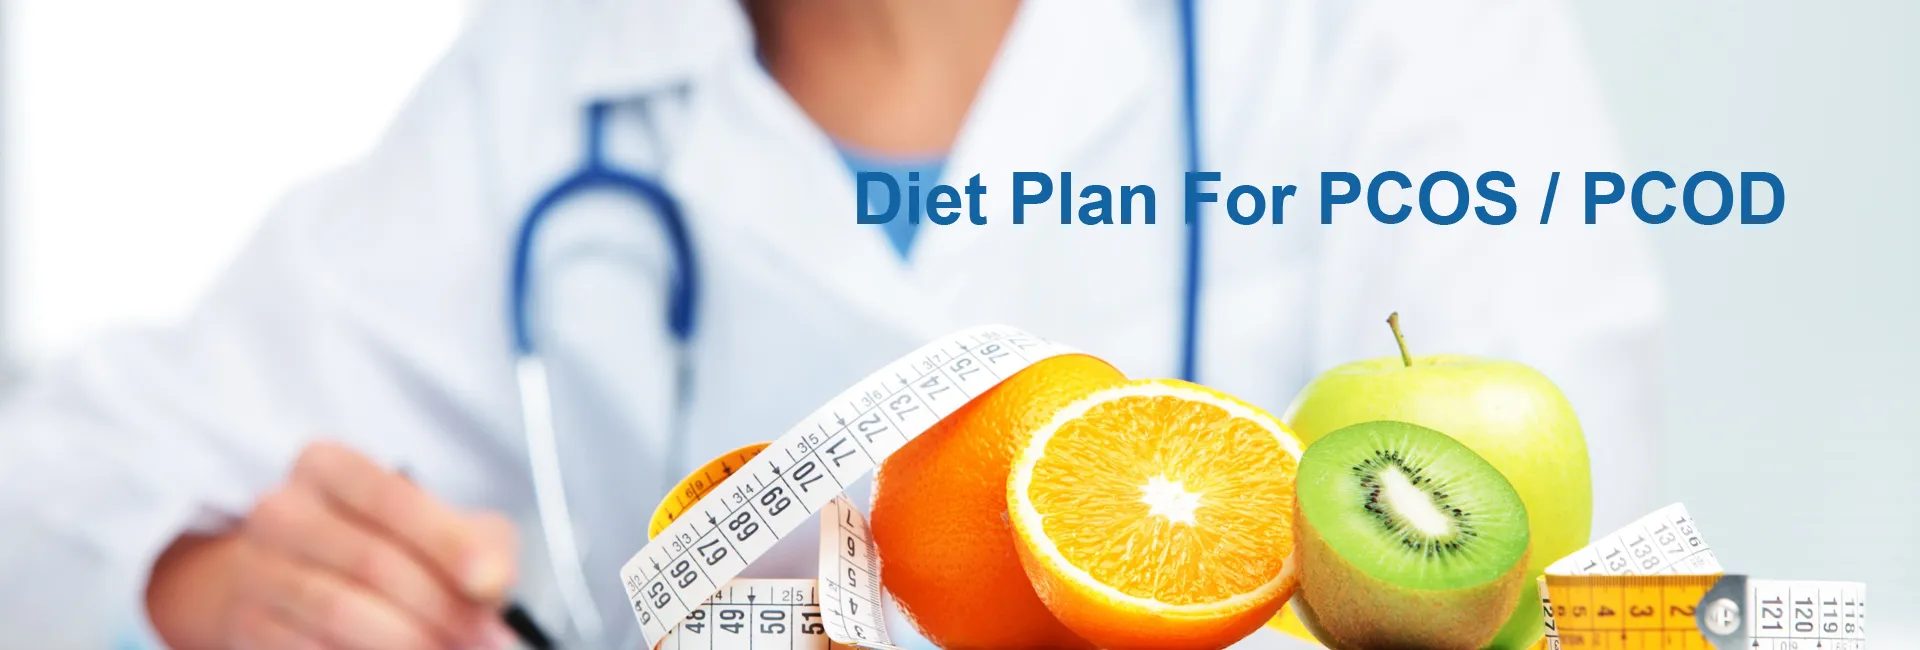 Diet Plan For PCOS / PCOD In Khor Khwair